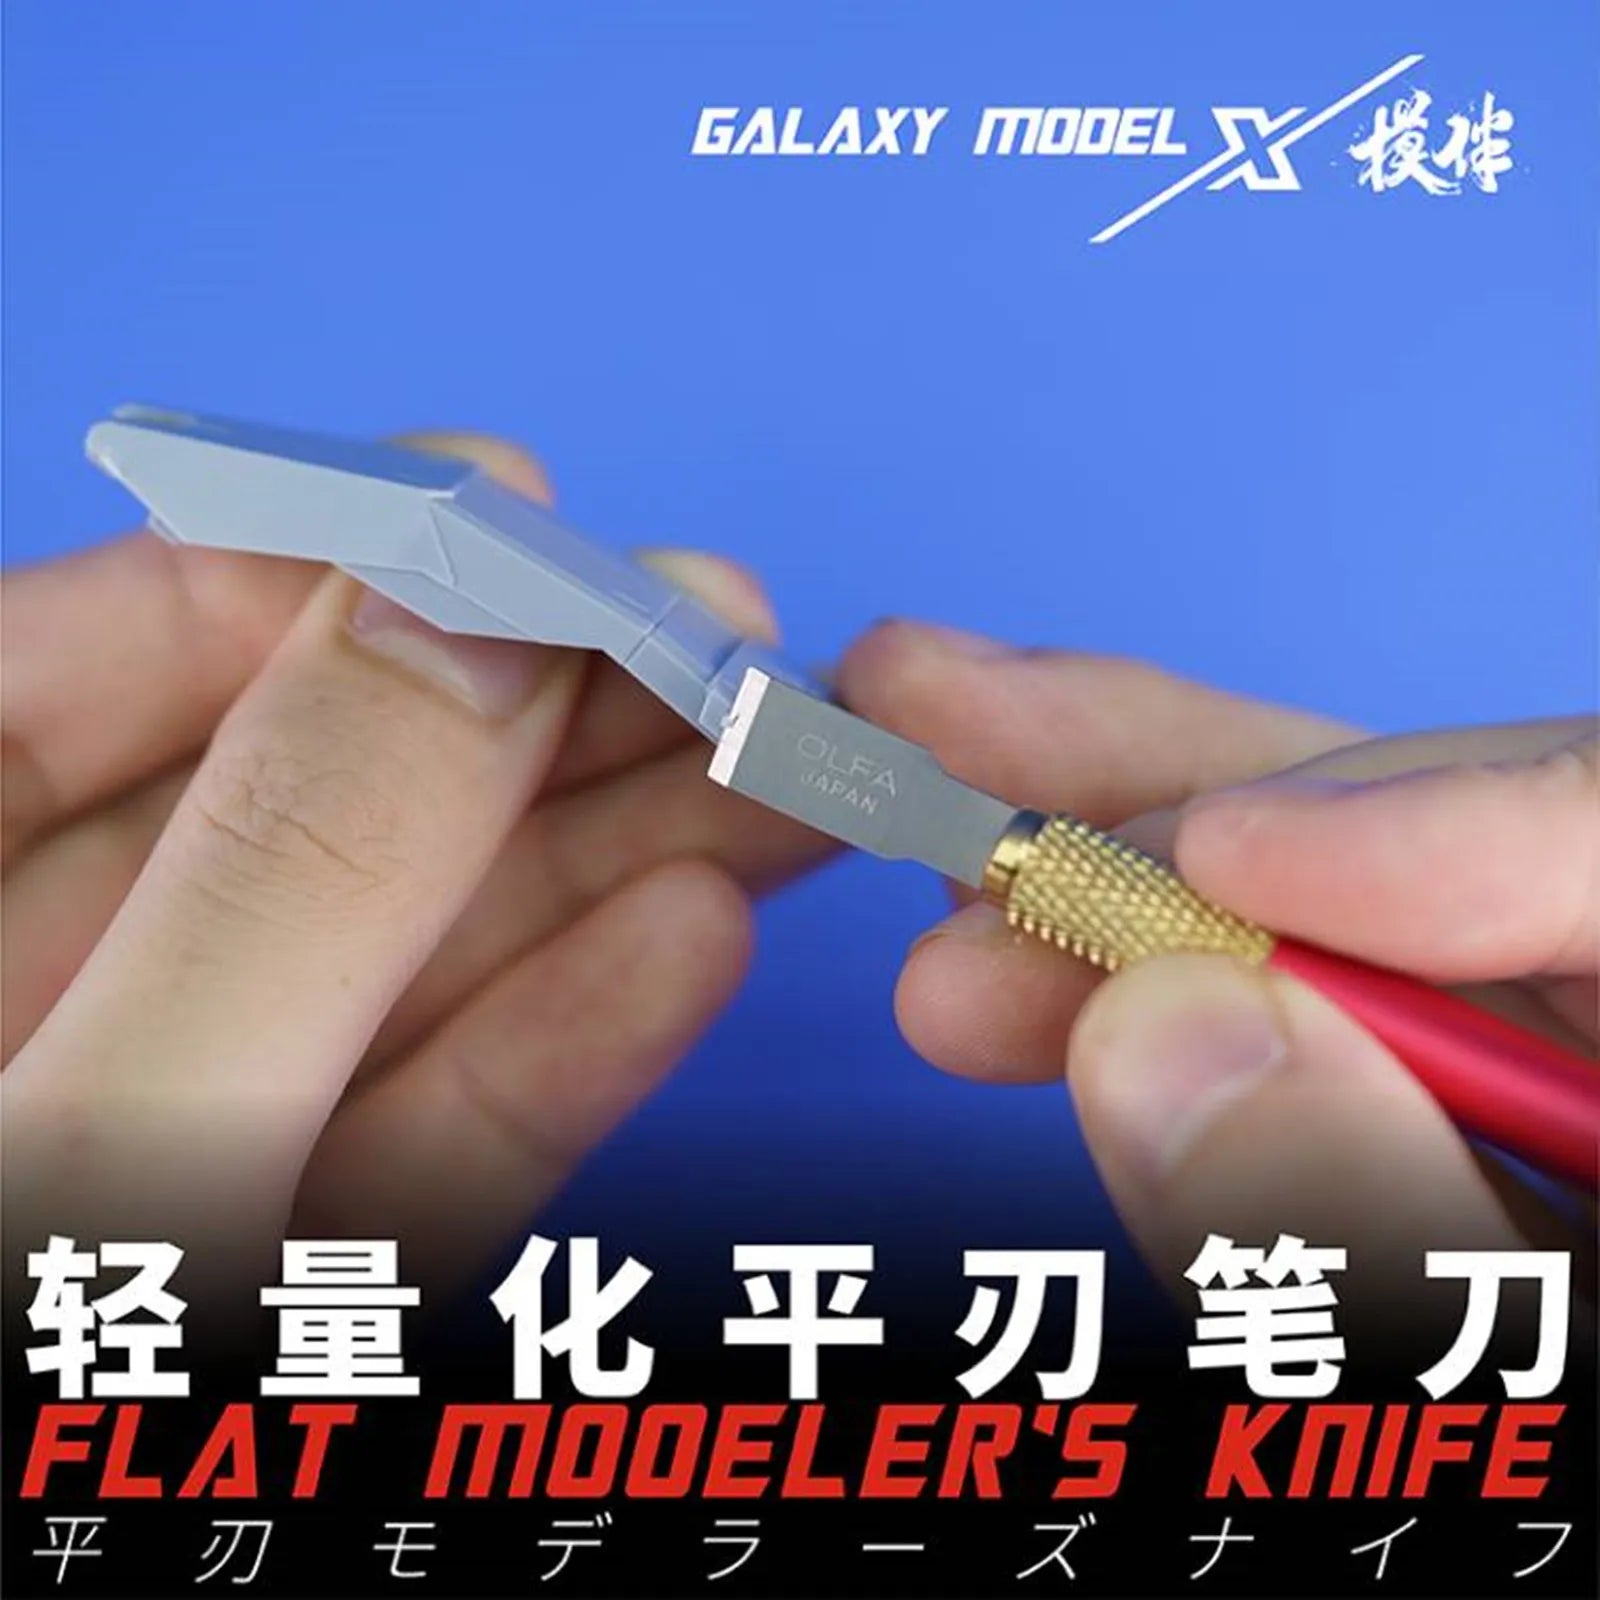 GALAXY Tool T09A Series Flat Modeler's Knife - Precision Tool for Model Kit Assembly